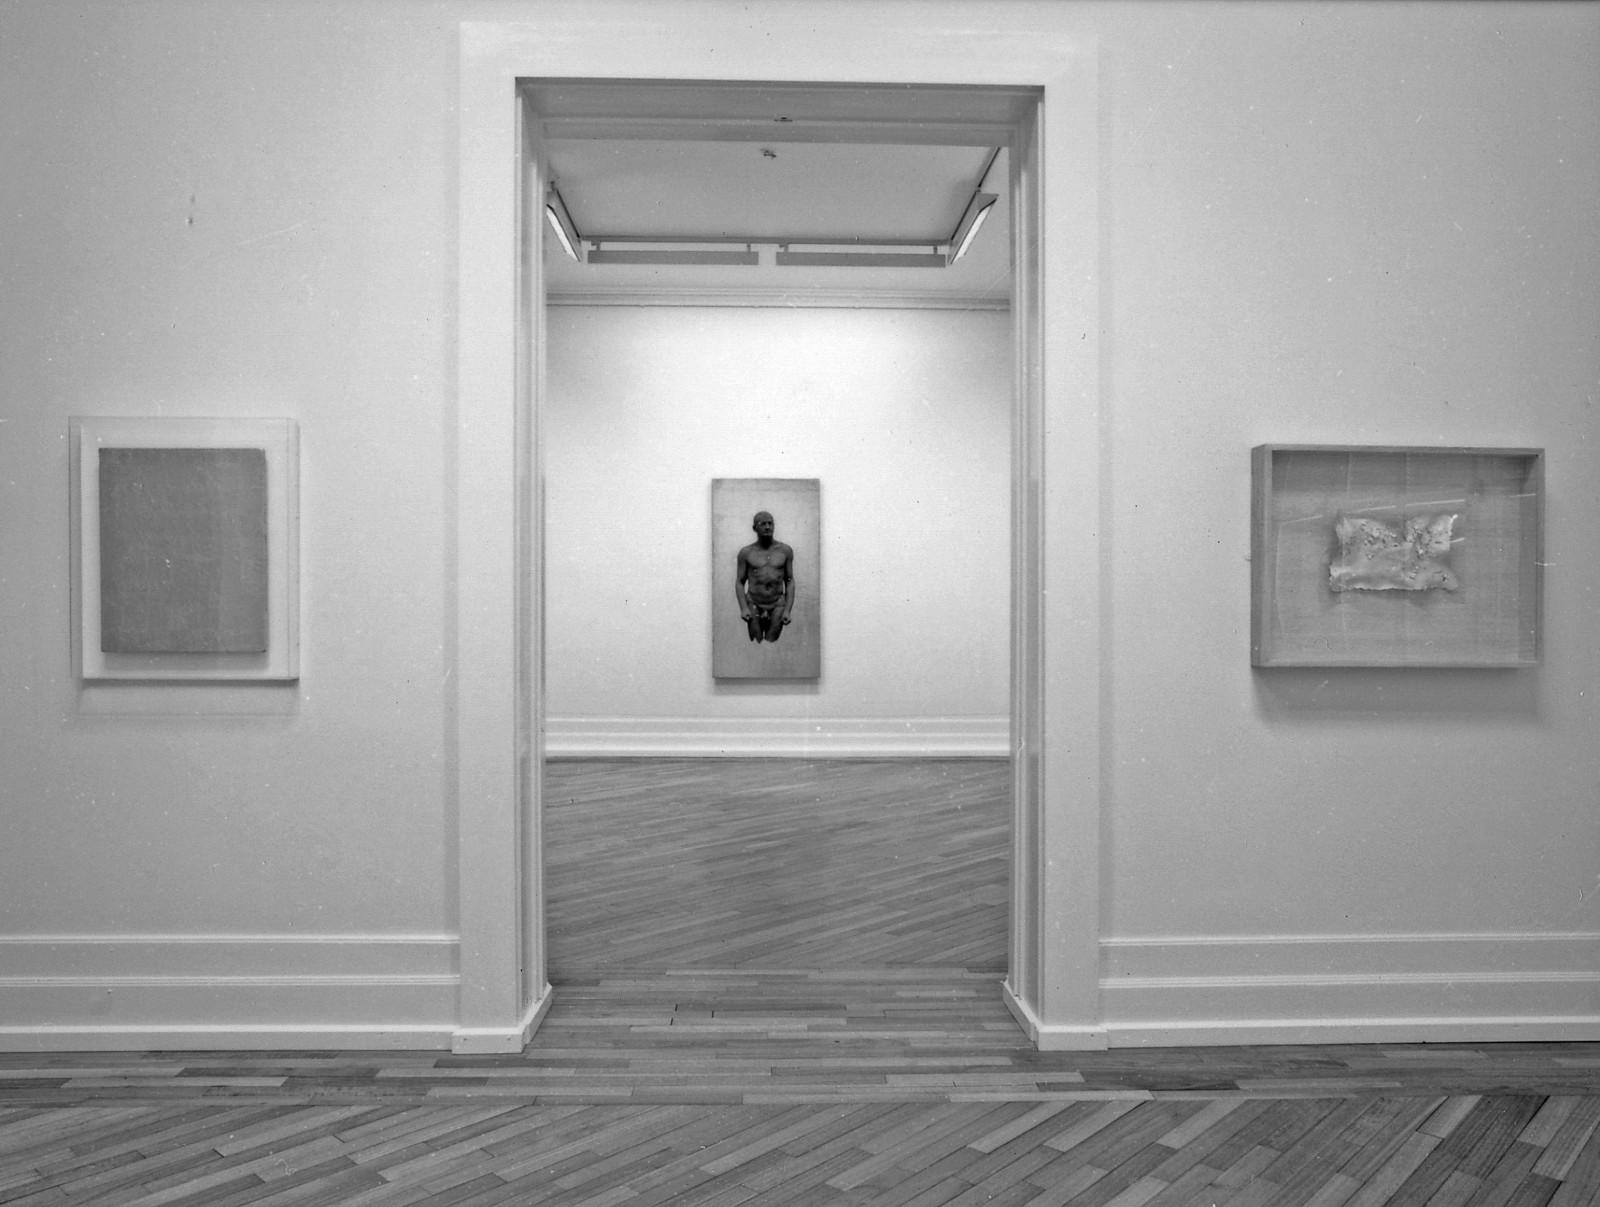 View of the exhibition "Yves Klein", Museet for Samtidskunst, 1997